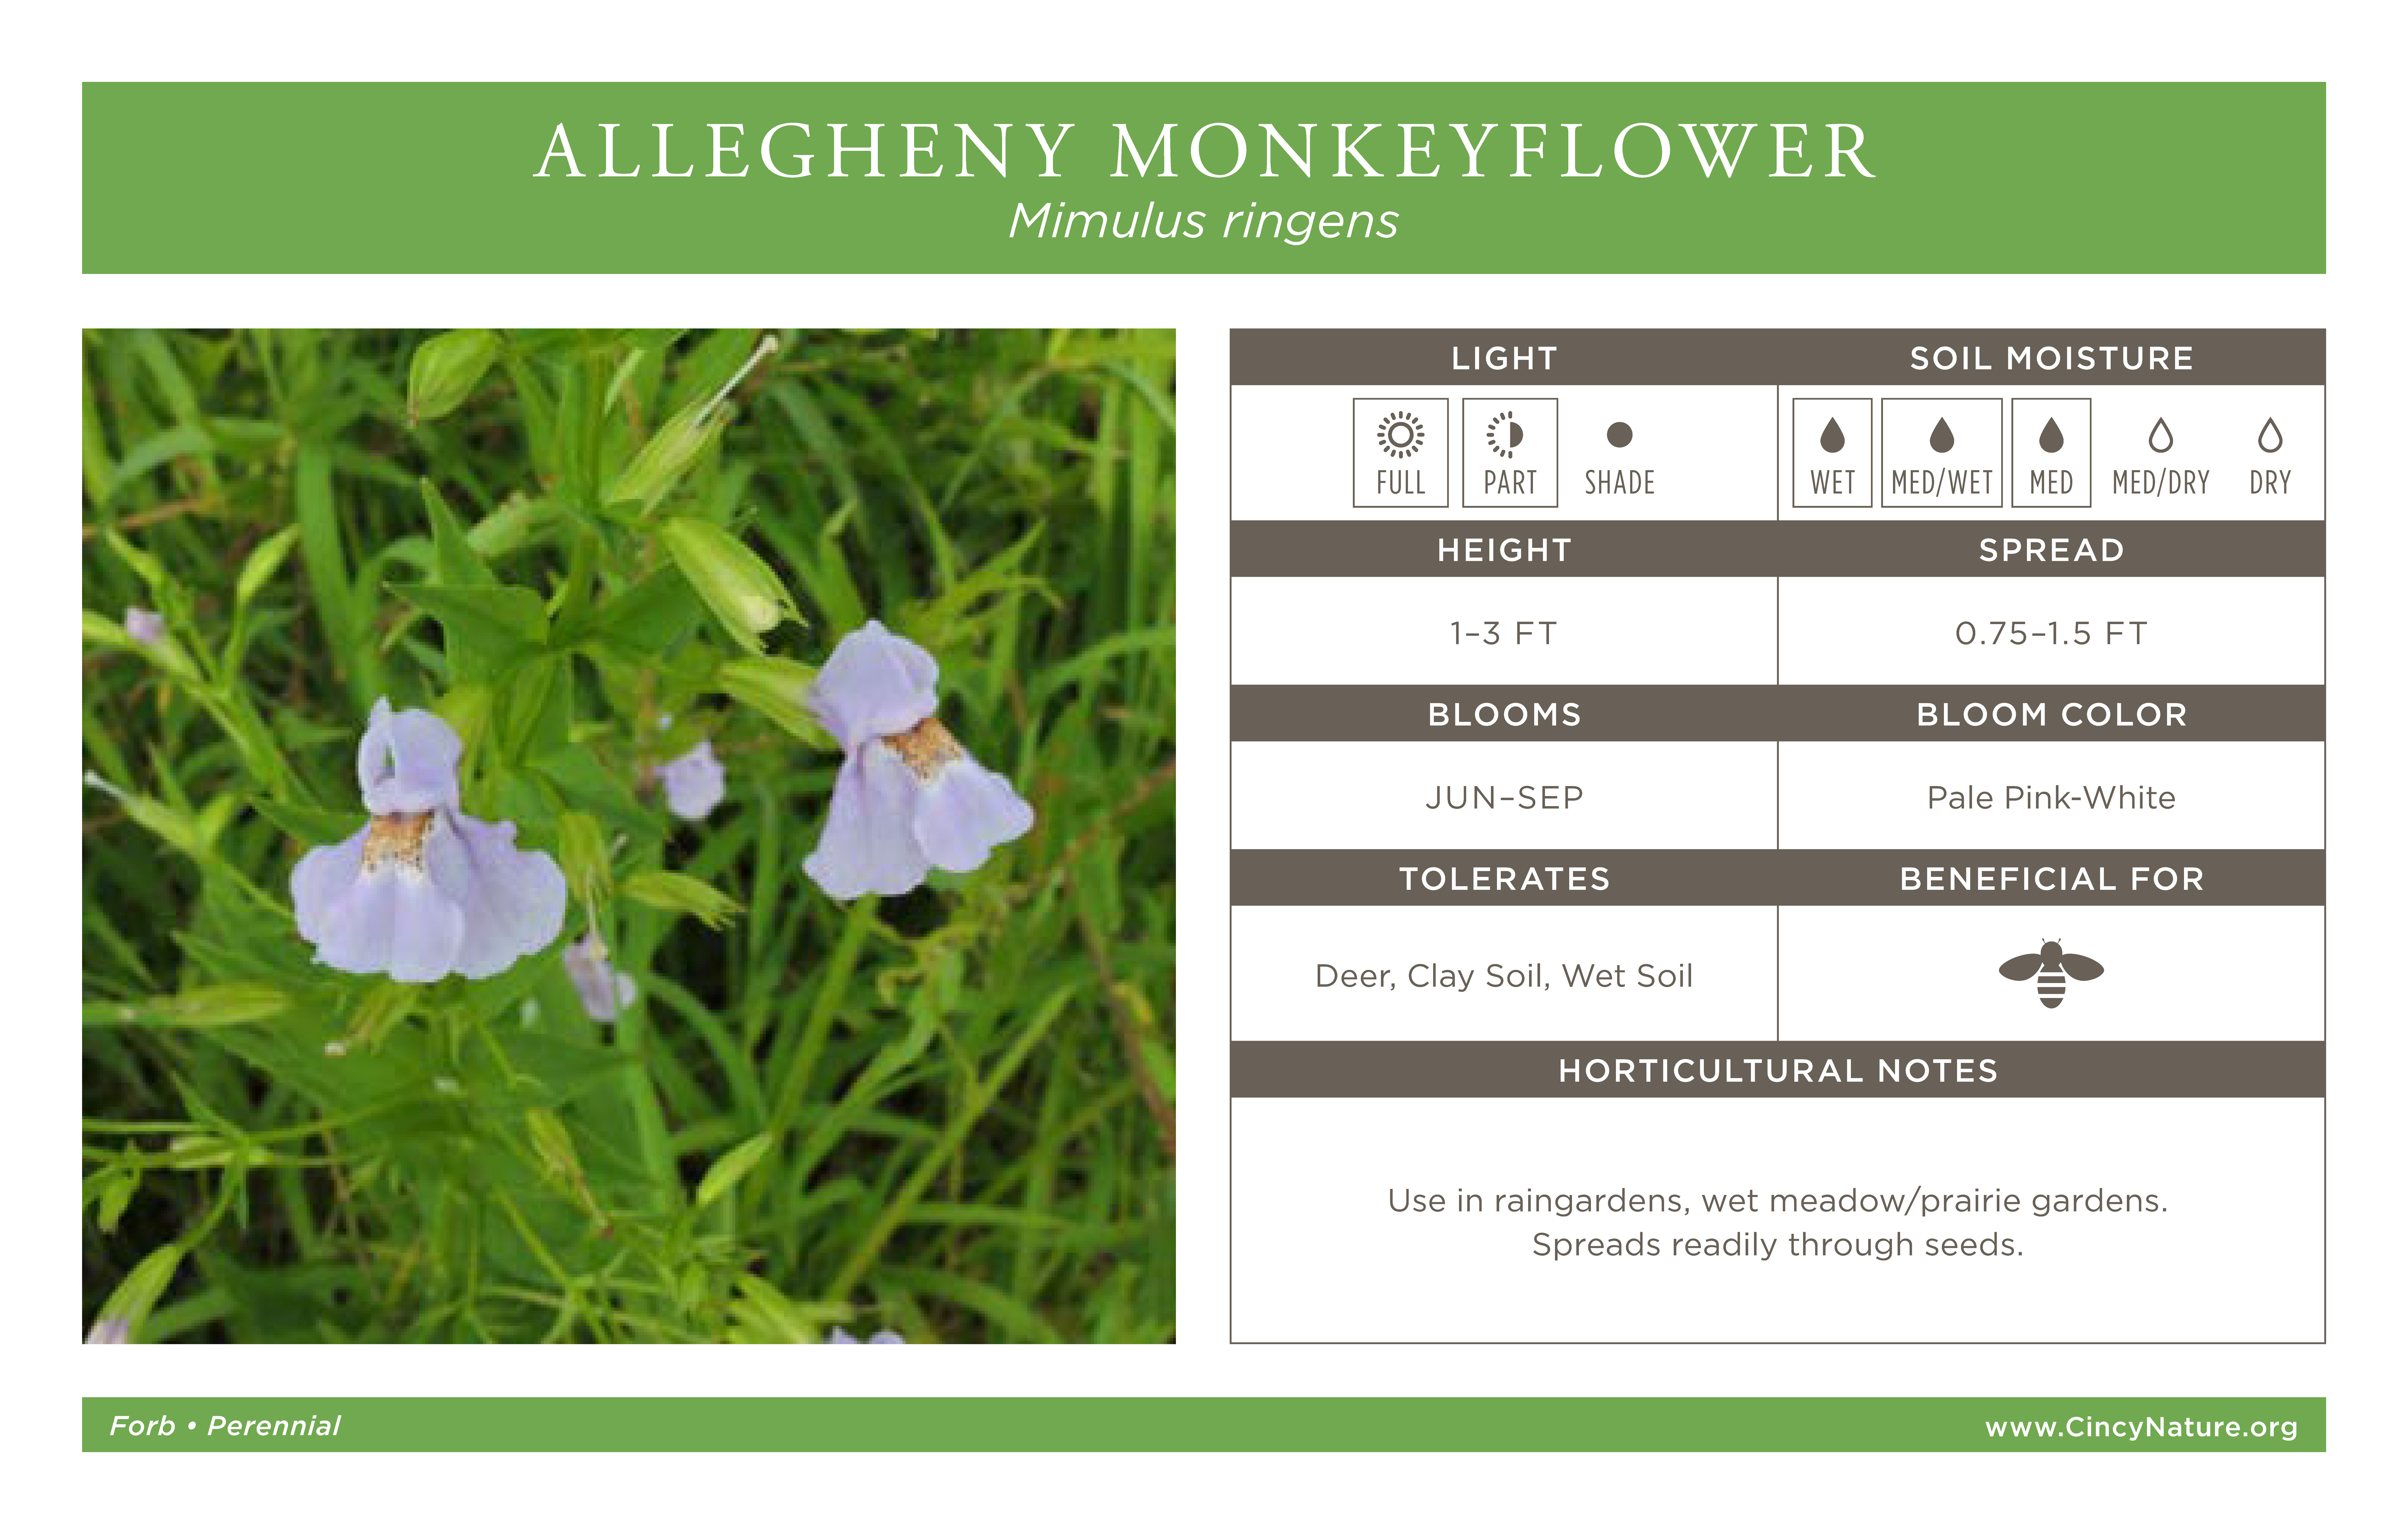 A graphic about Allegheny Monkeyflower